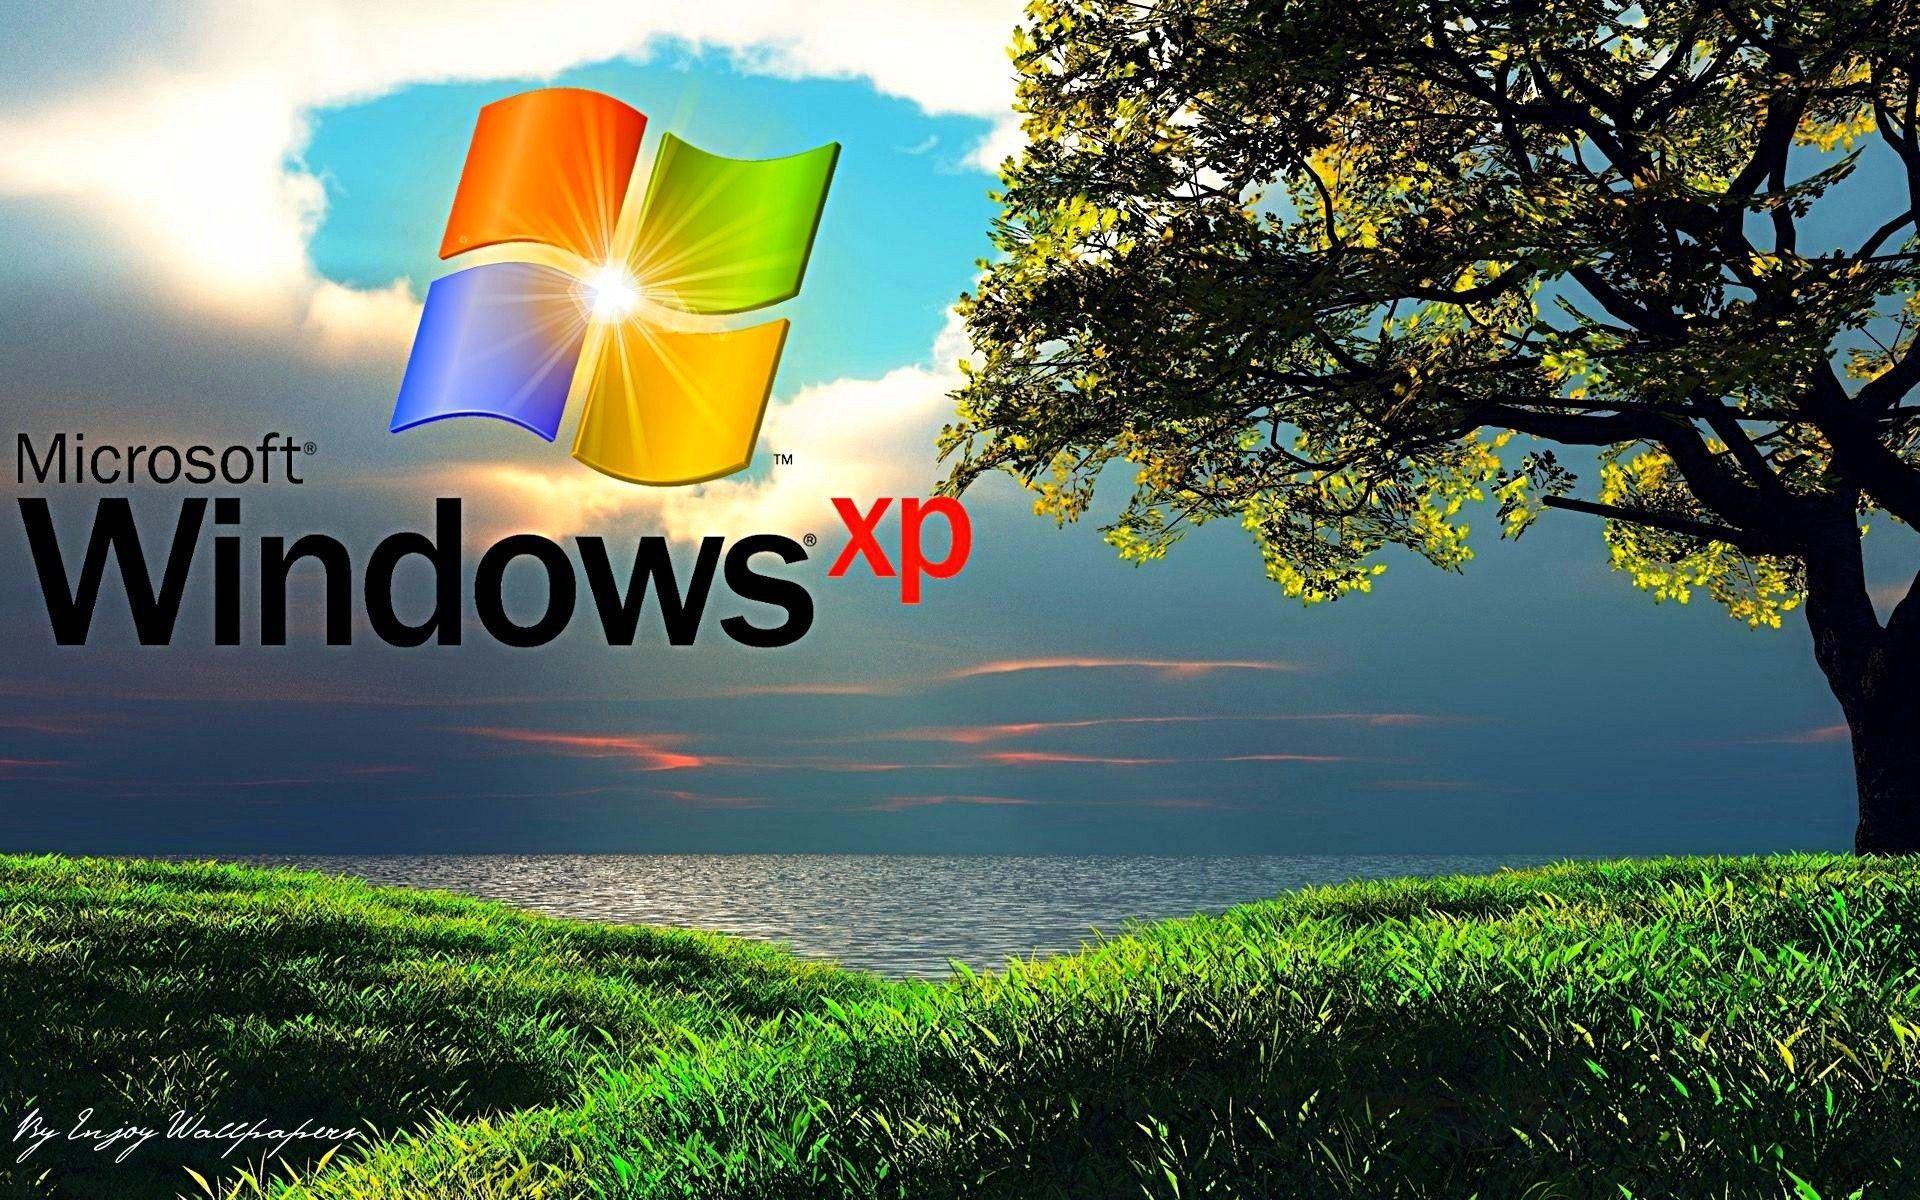 Windows XP phone wallpaper» 1080P, 2k, 4k Full HD Wallpapers, Backgrounds  Free Download | Wallpaper Crafter